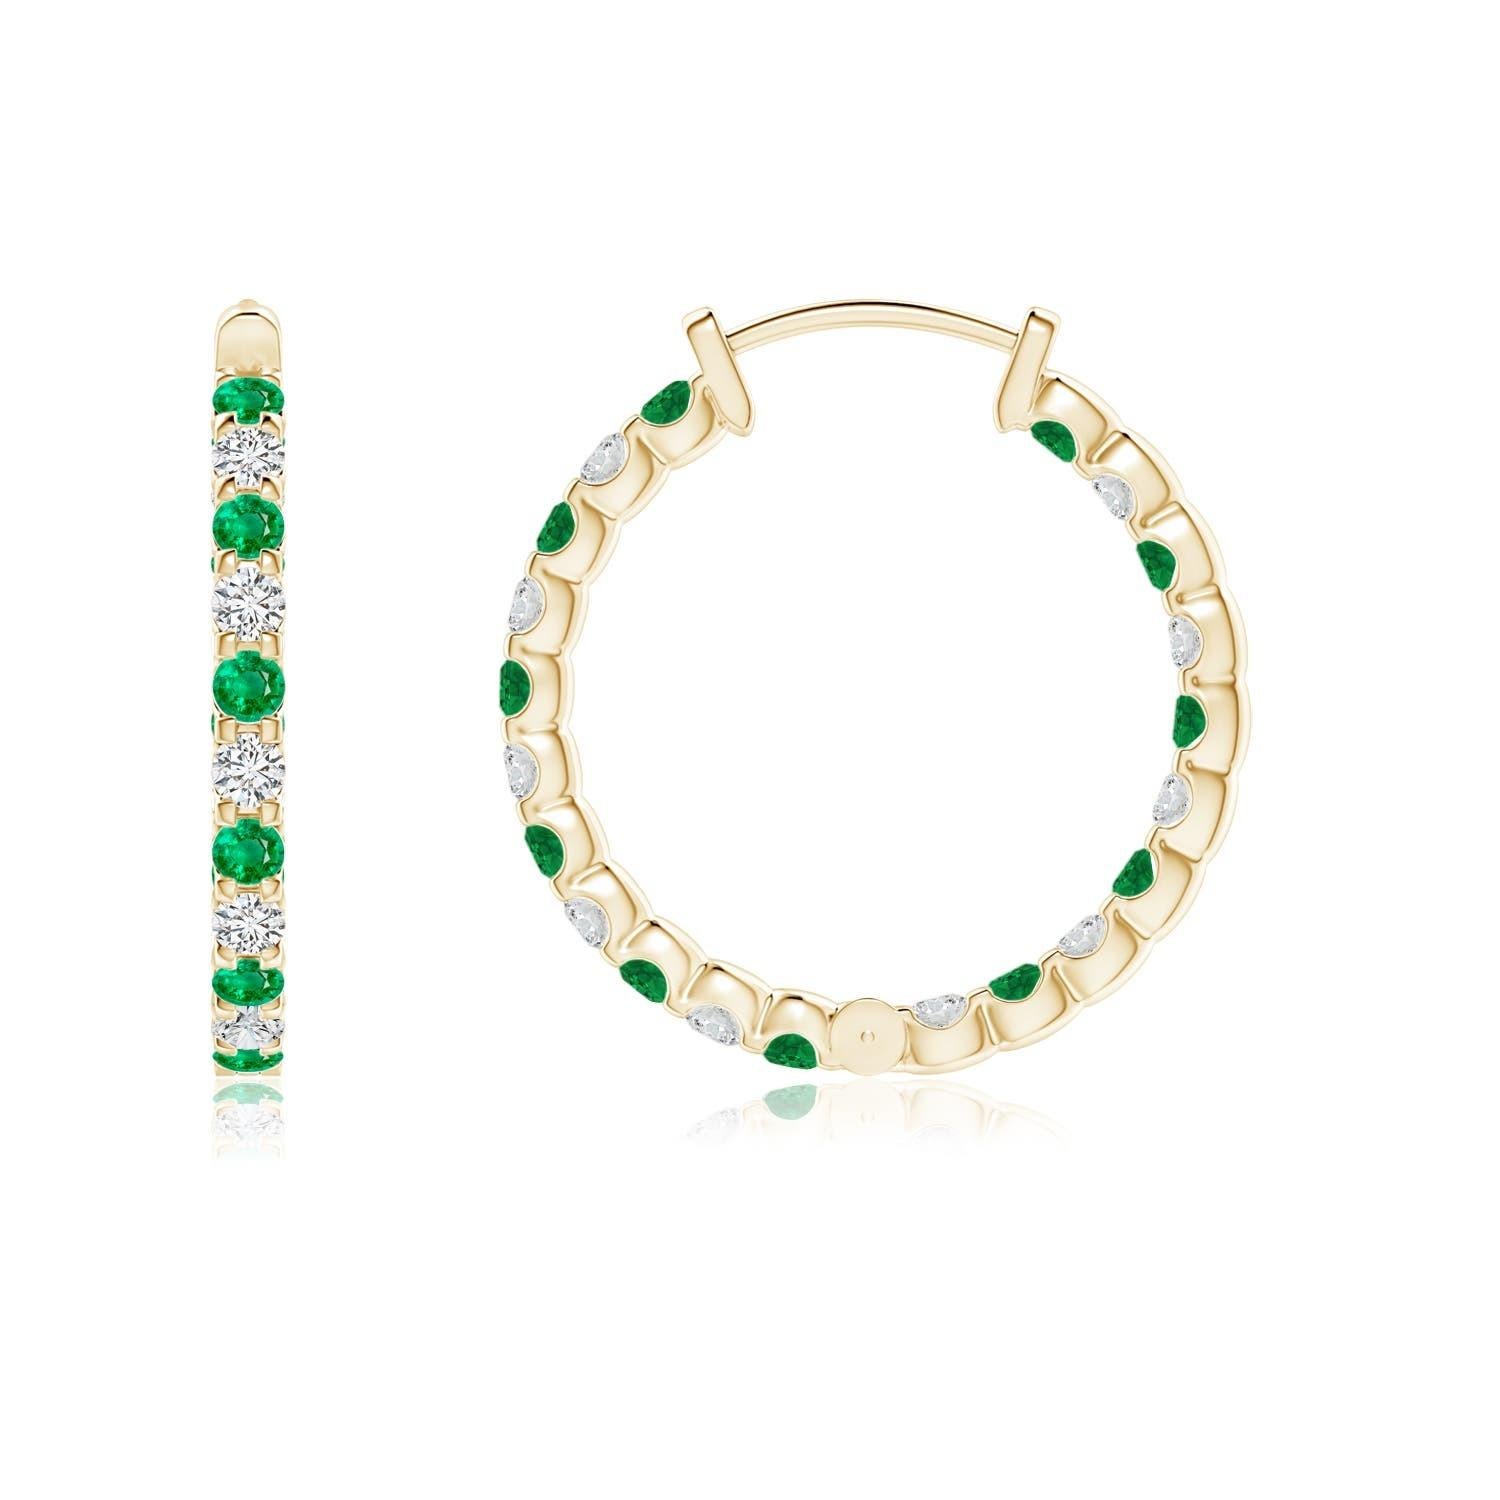 Alternately secured in prong settings are lush green emeralds and brilliant diamonds on these stunning hoop earrings. The scintillating gems are embellished on the outside as well as the inside of these 14k yellow gold hoops, showcasing a striking